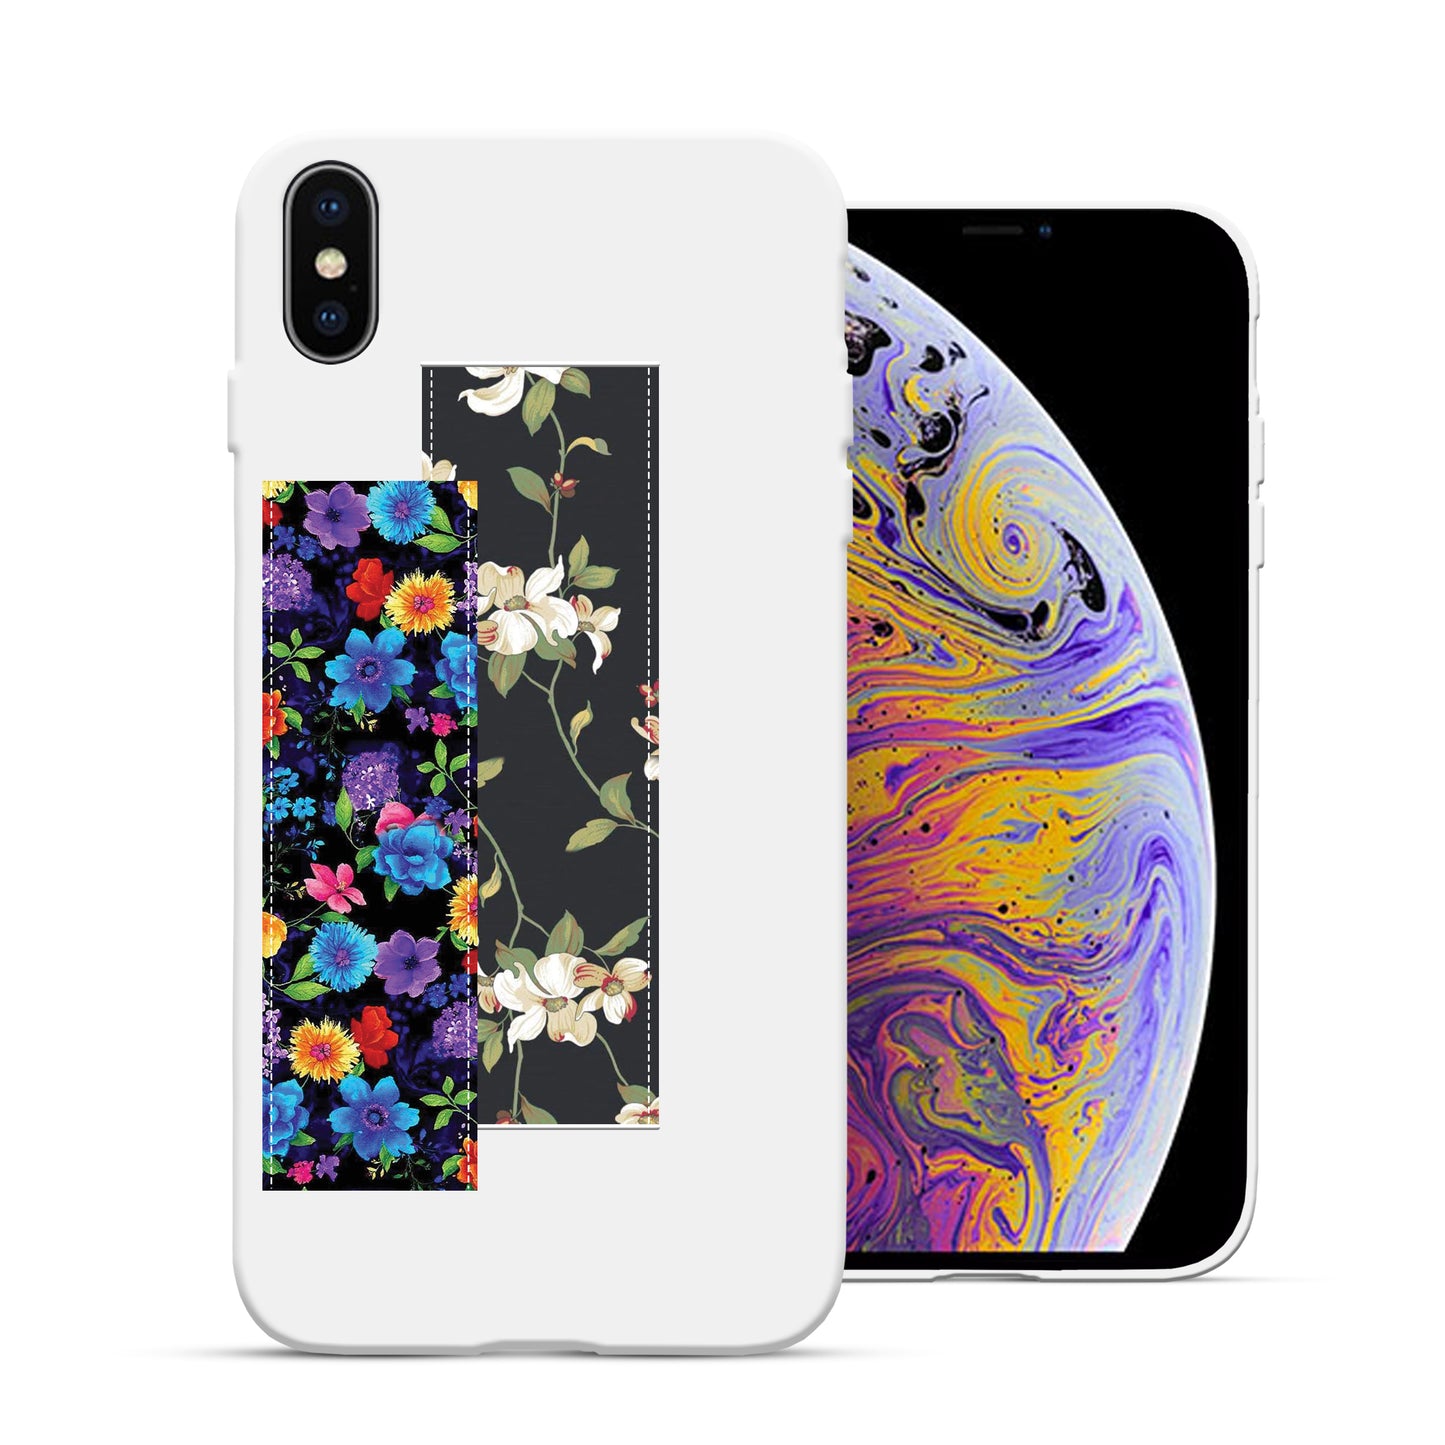 Finger Loop Phone Case For iPhone XS Max White With Custom Strap